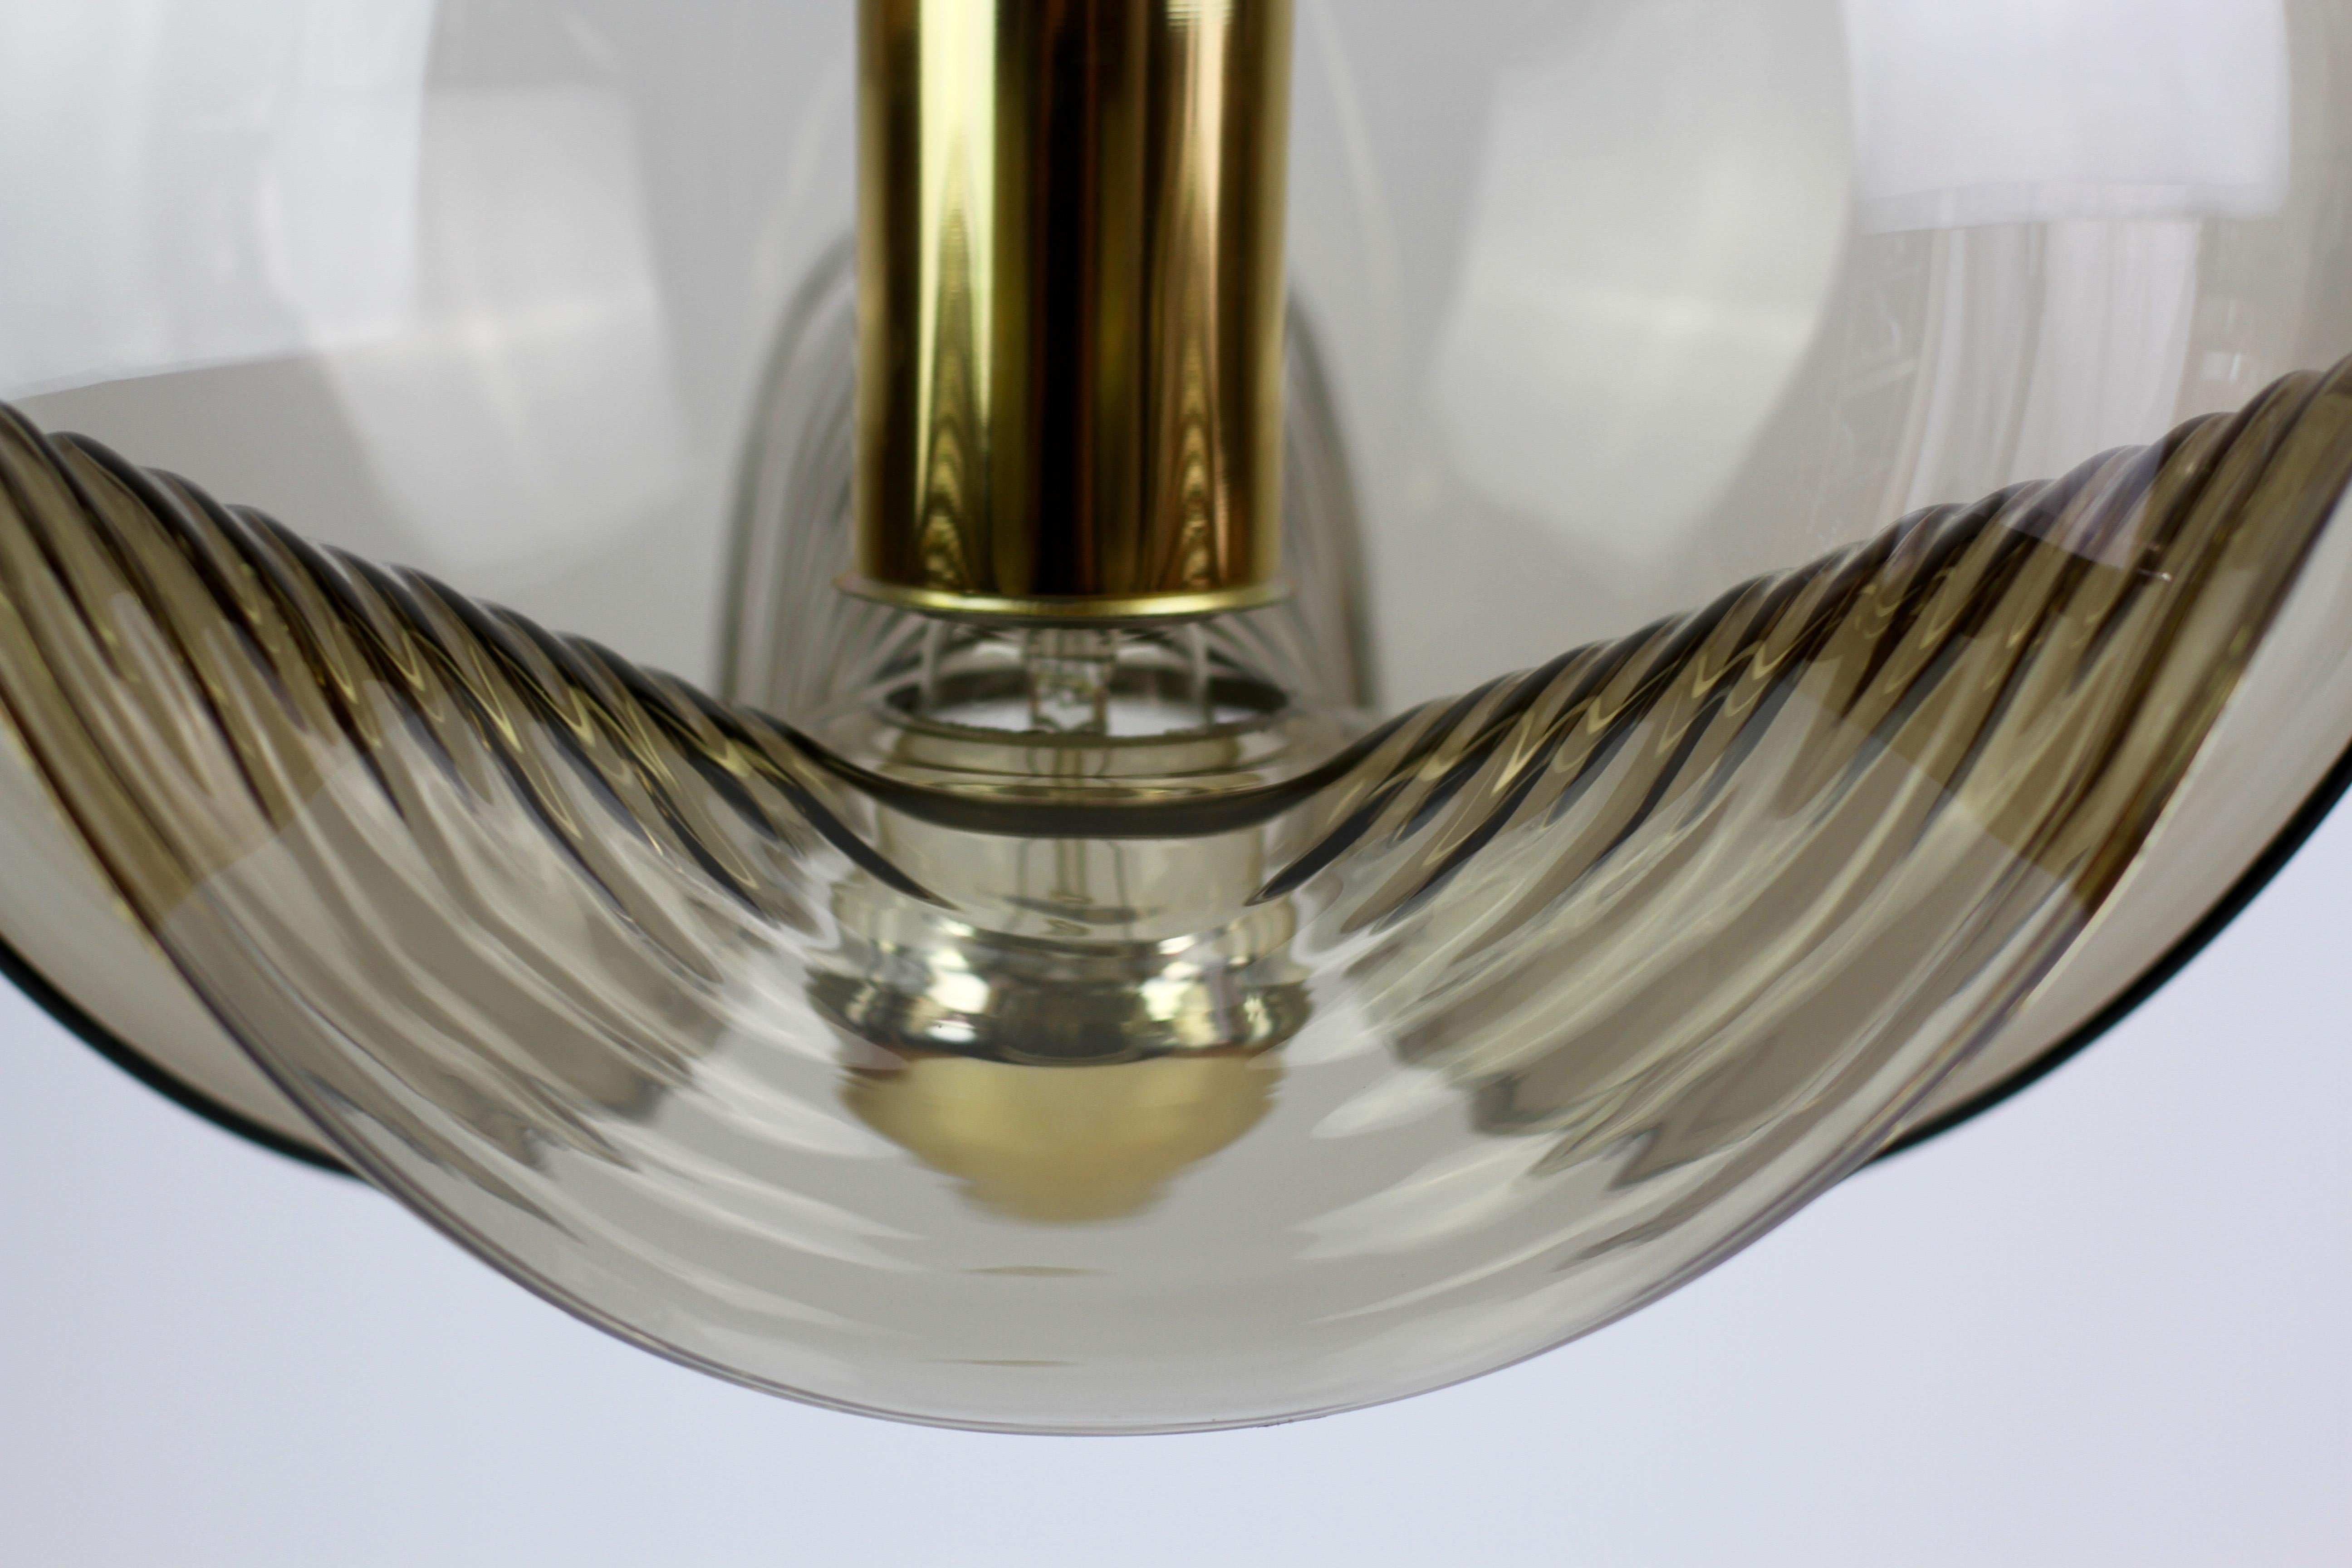 Smoked Glass 1 of 2 Peill & Putzler Large Biomorphic Hanging Pendant Lights Lamps, C. 1975 For Sale